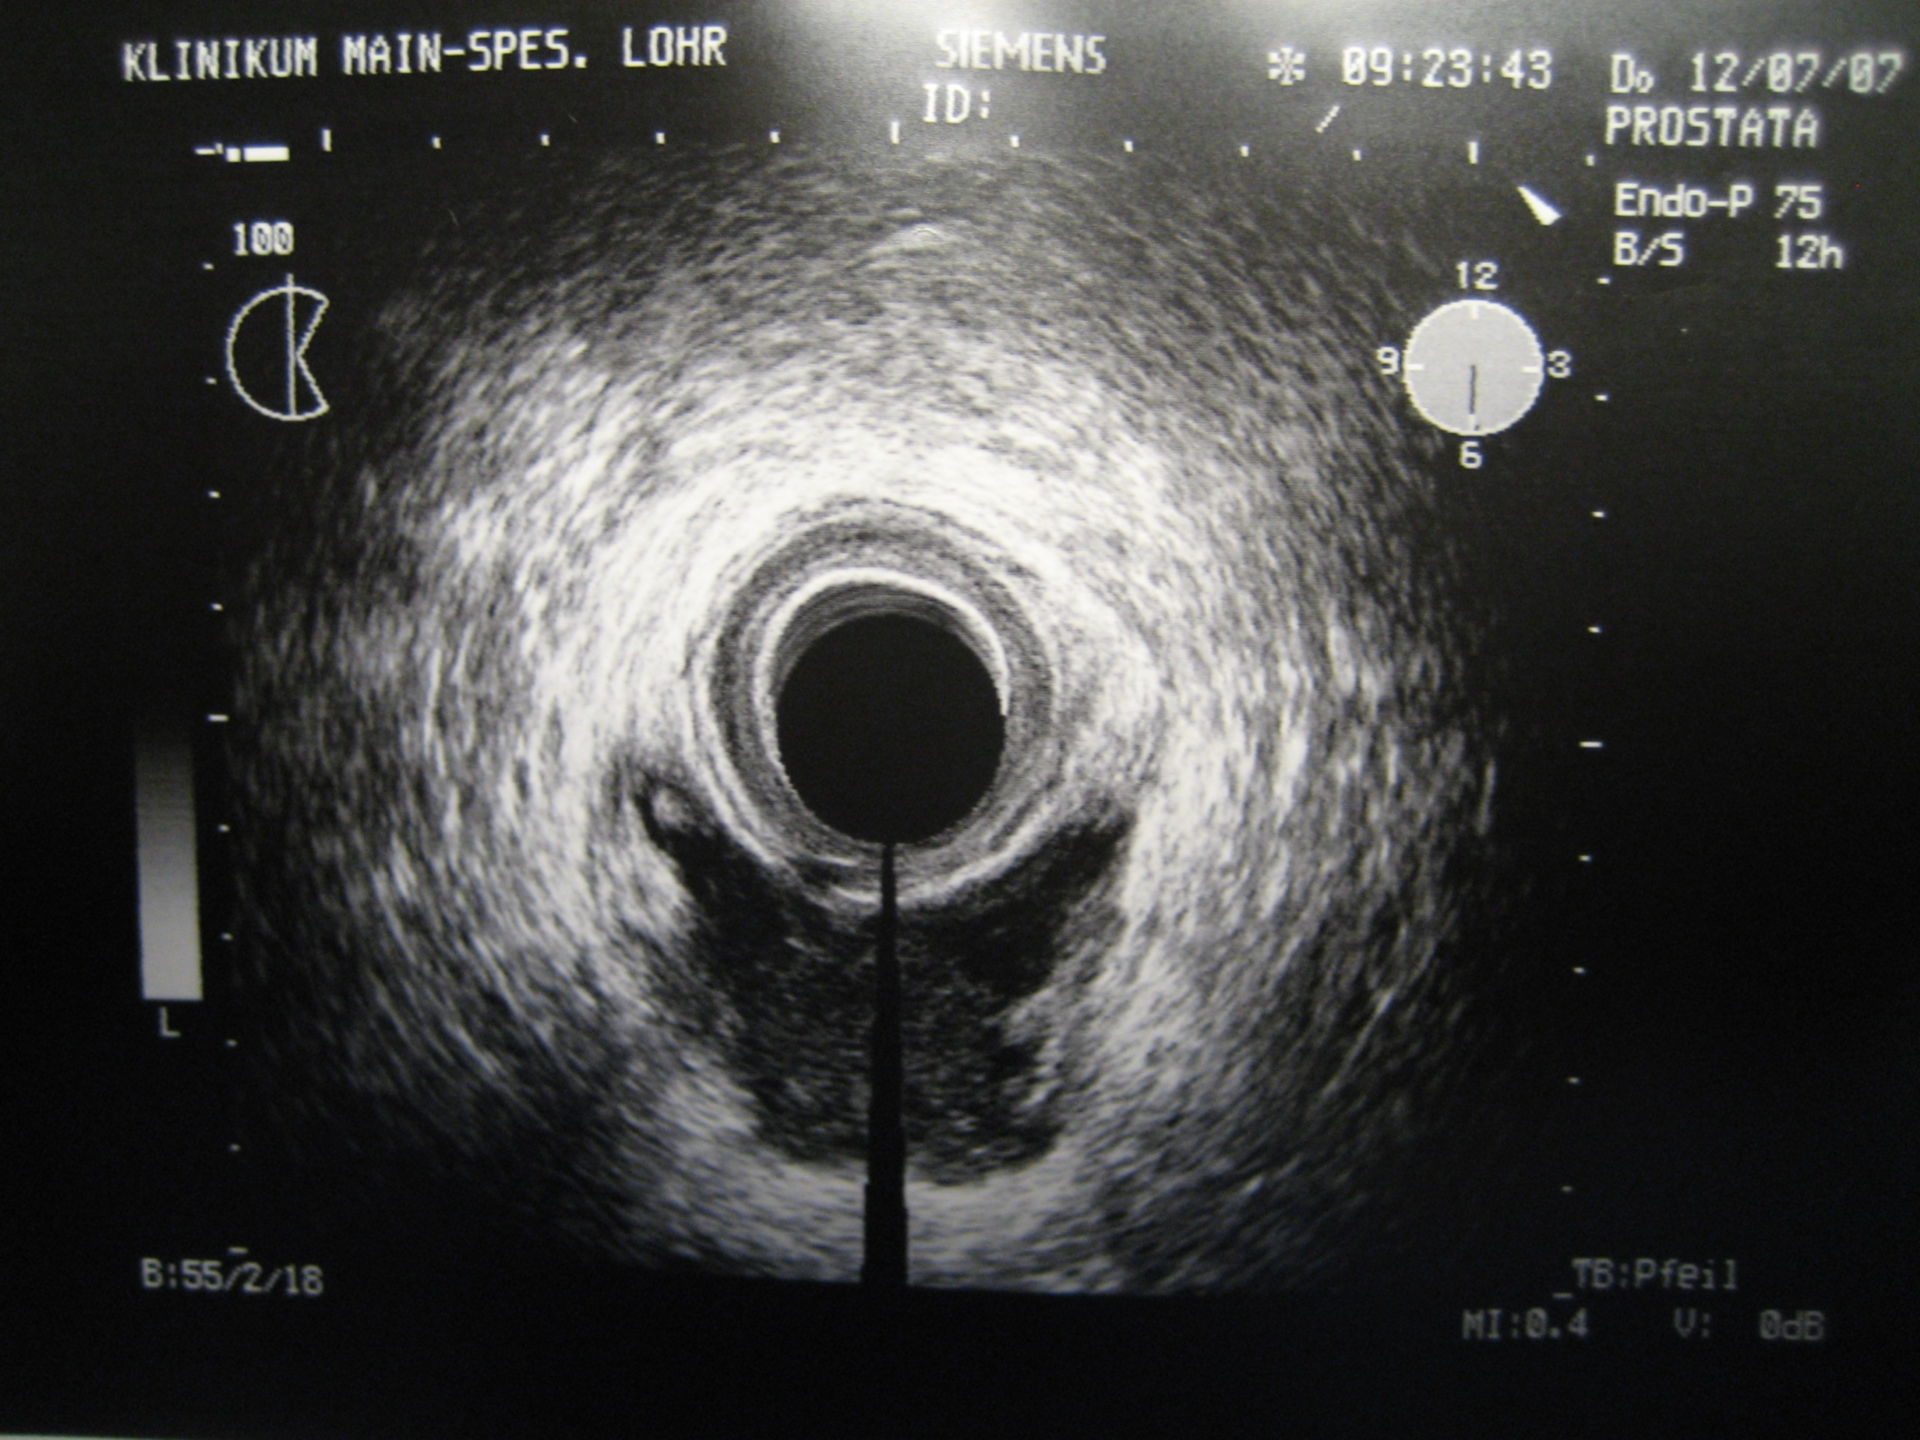 Abscess of the anal sphincter - endoscopic ultrasound